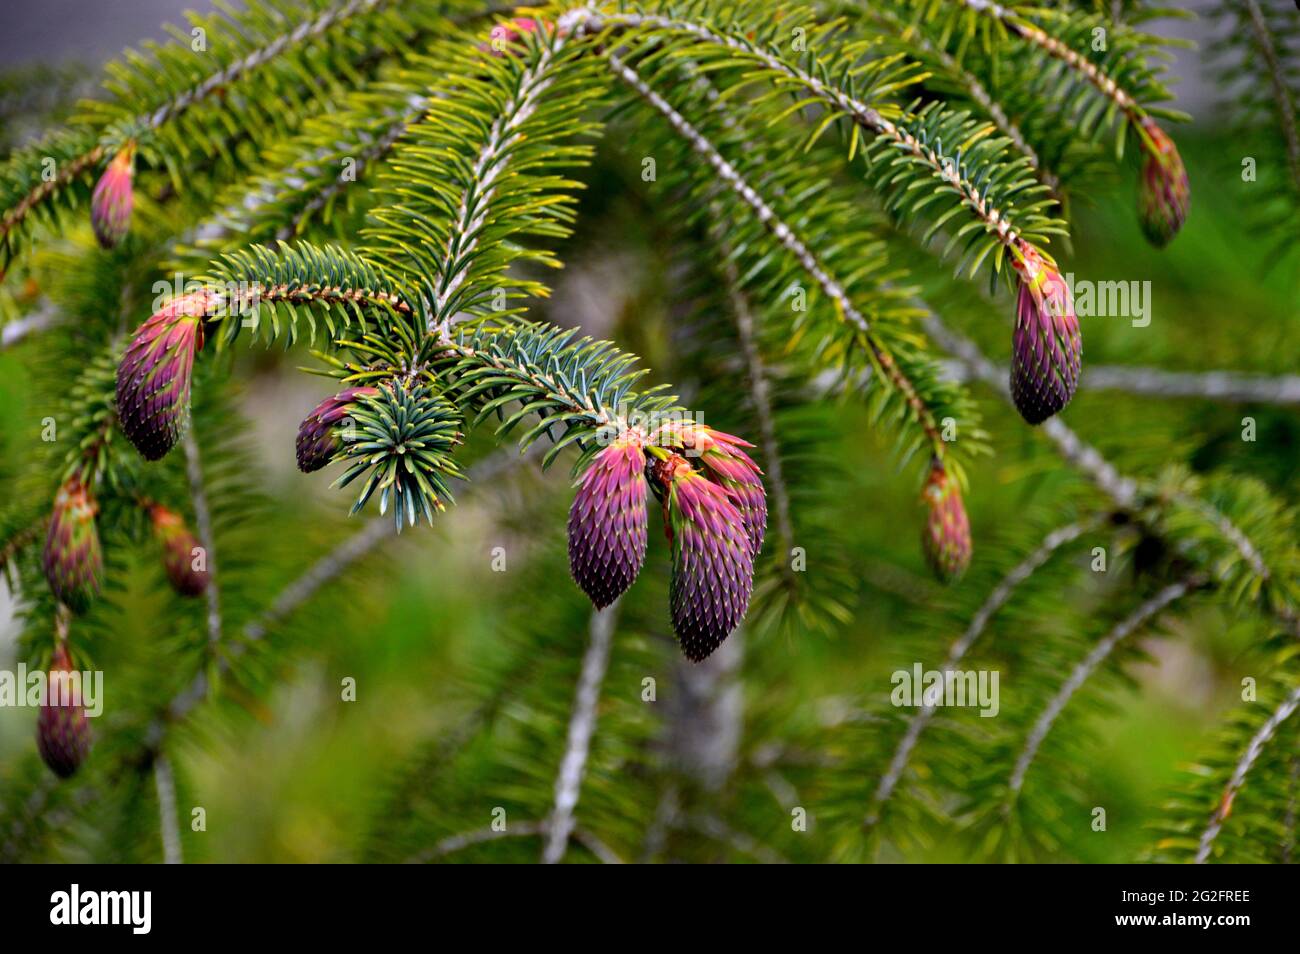 Red Buds on the Picea Smithiana 'Morinda Spruce' Tree grown at the Himalayan Garden & Sculpture Park, Grewelthorpe, Ripon, North Yorkshire, England. Stock Photo